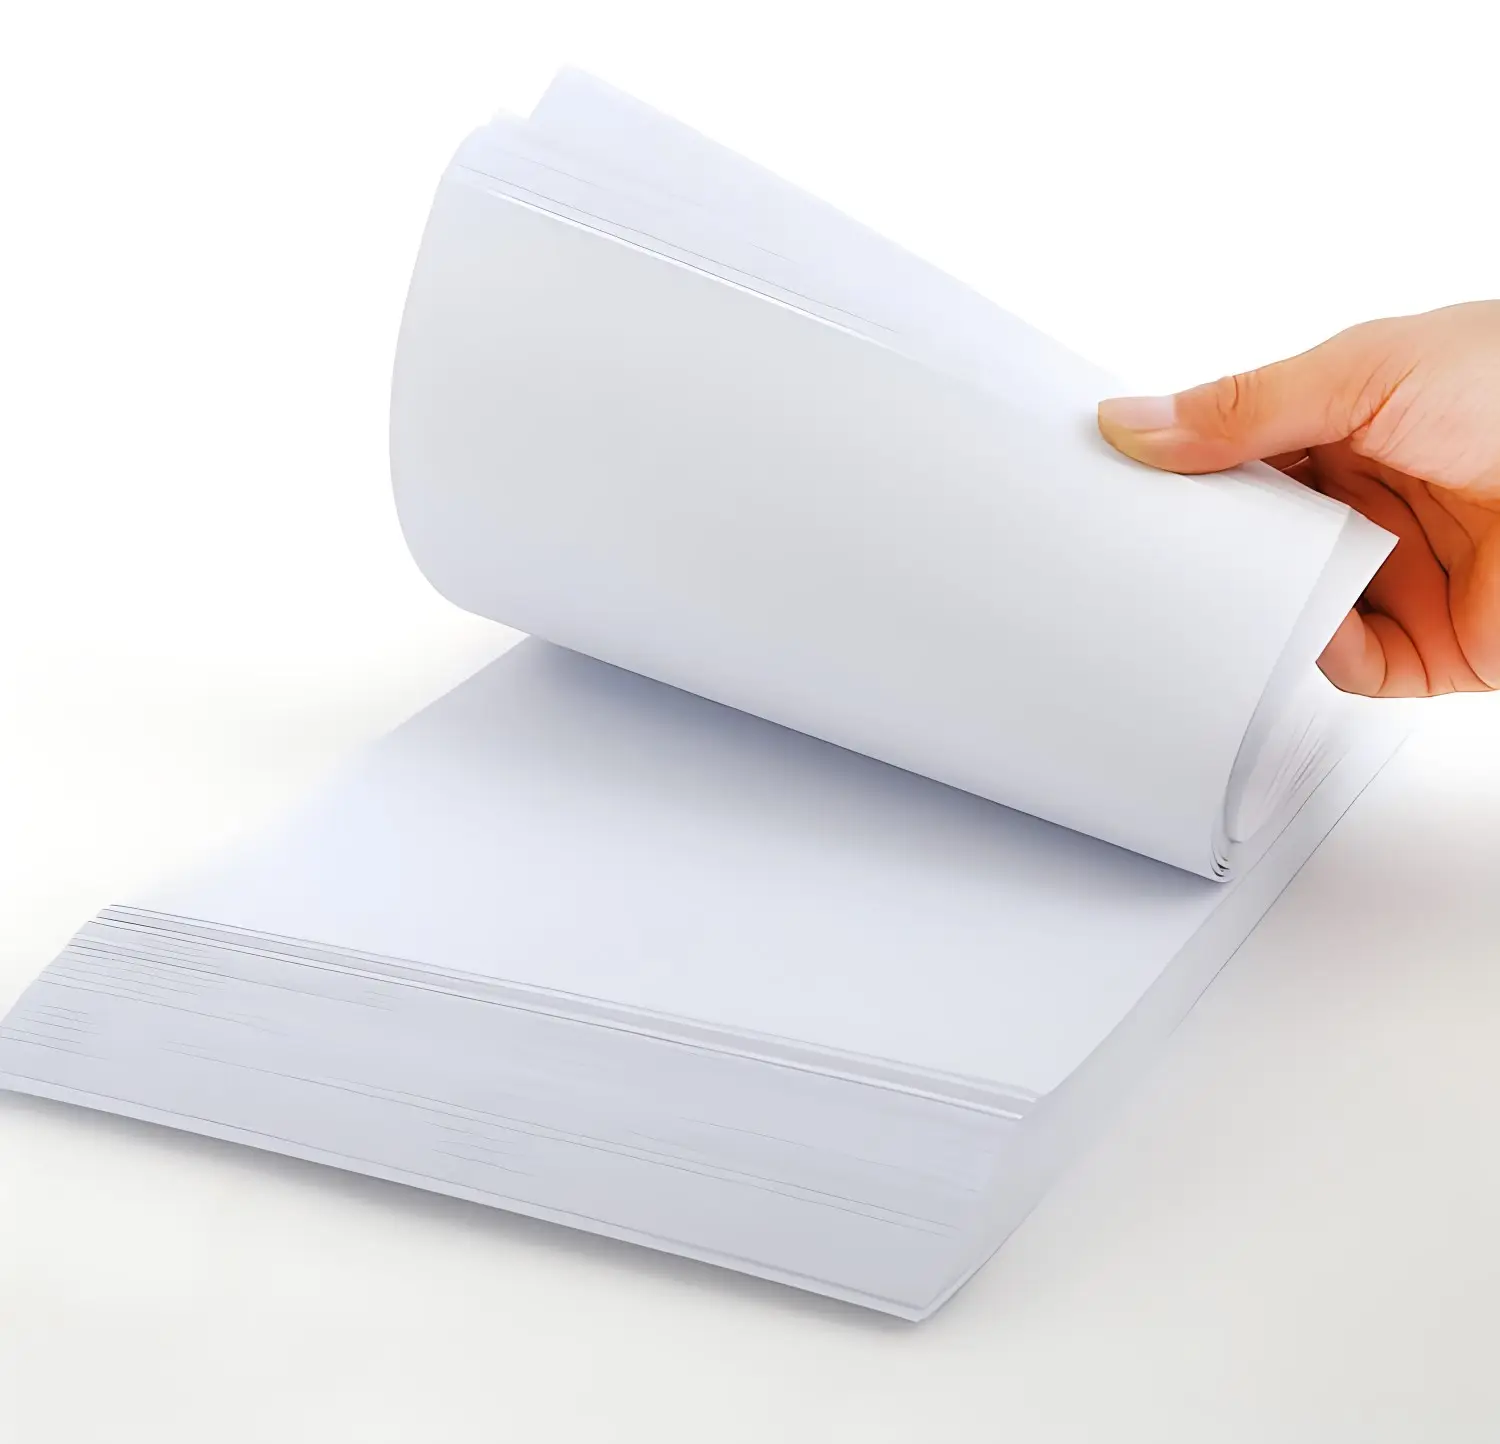 Hot selling 70 75 80 Gsm Copy A4 Paper multipurpose office paper